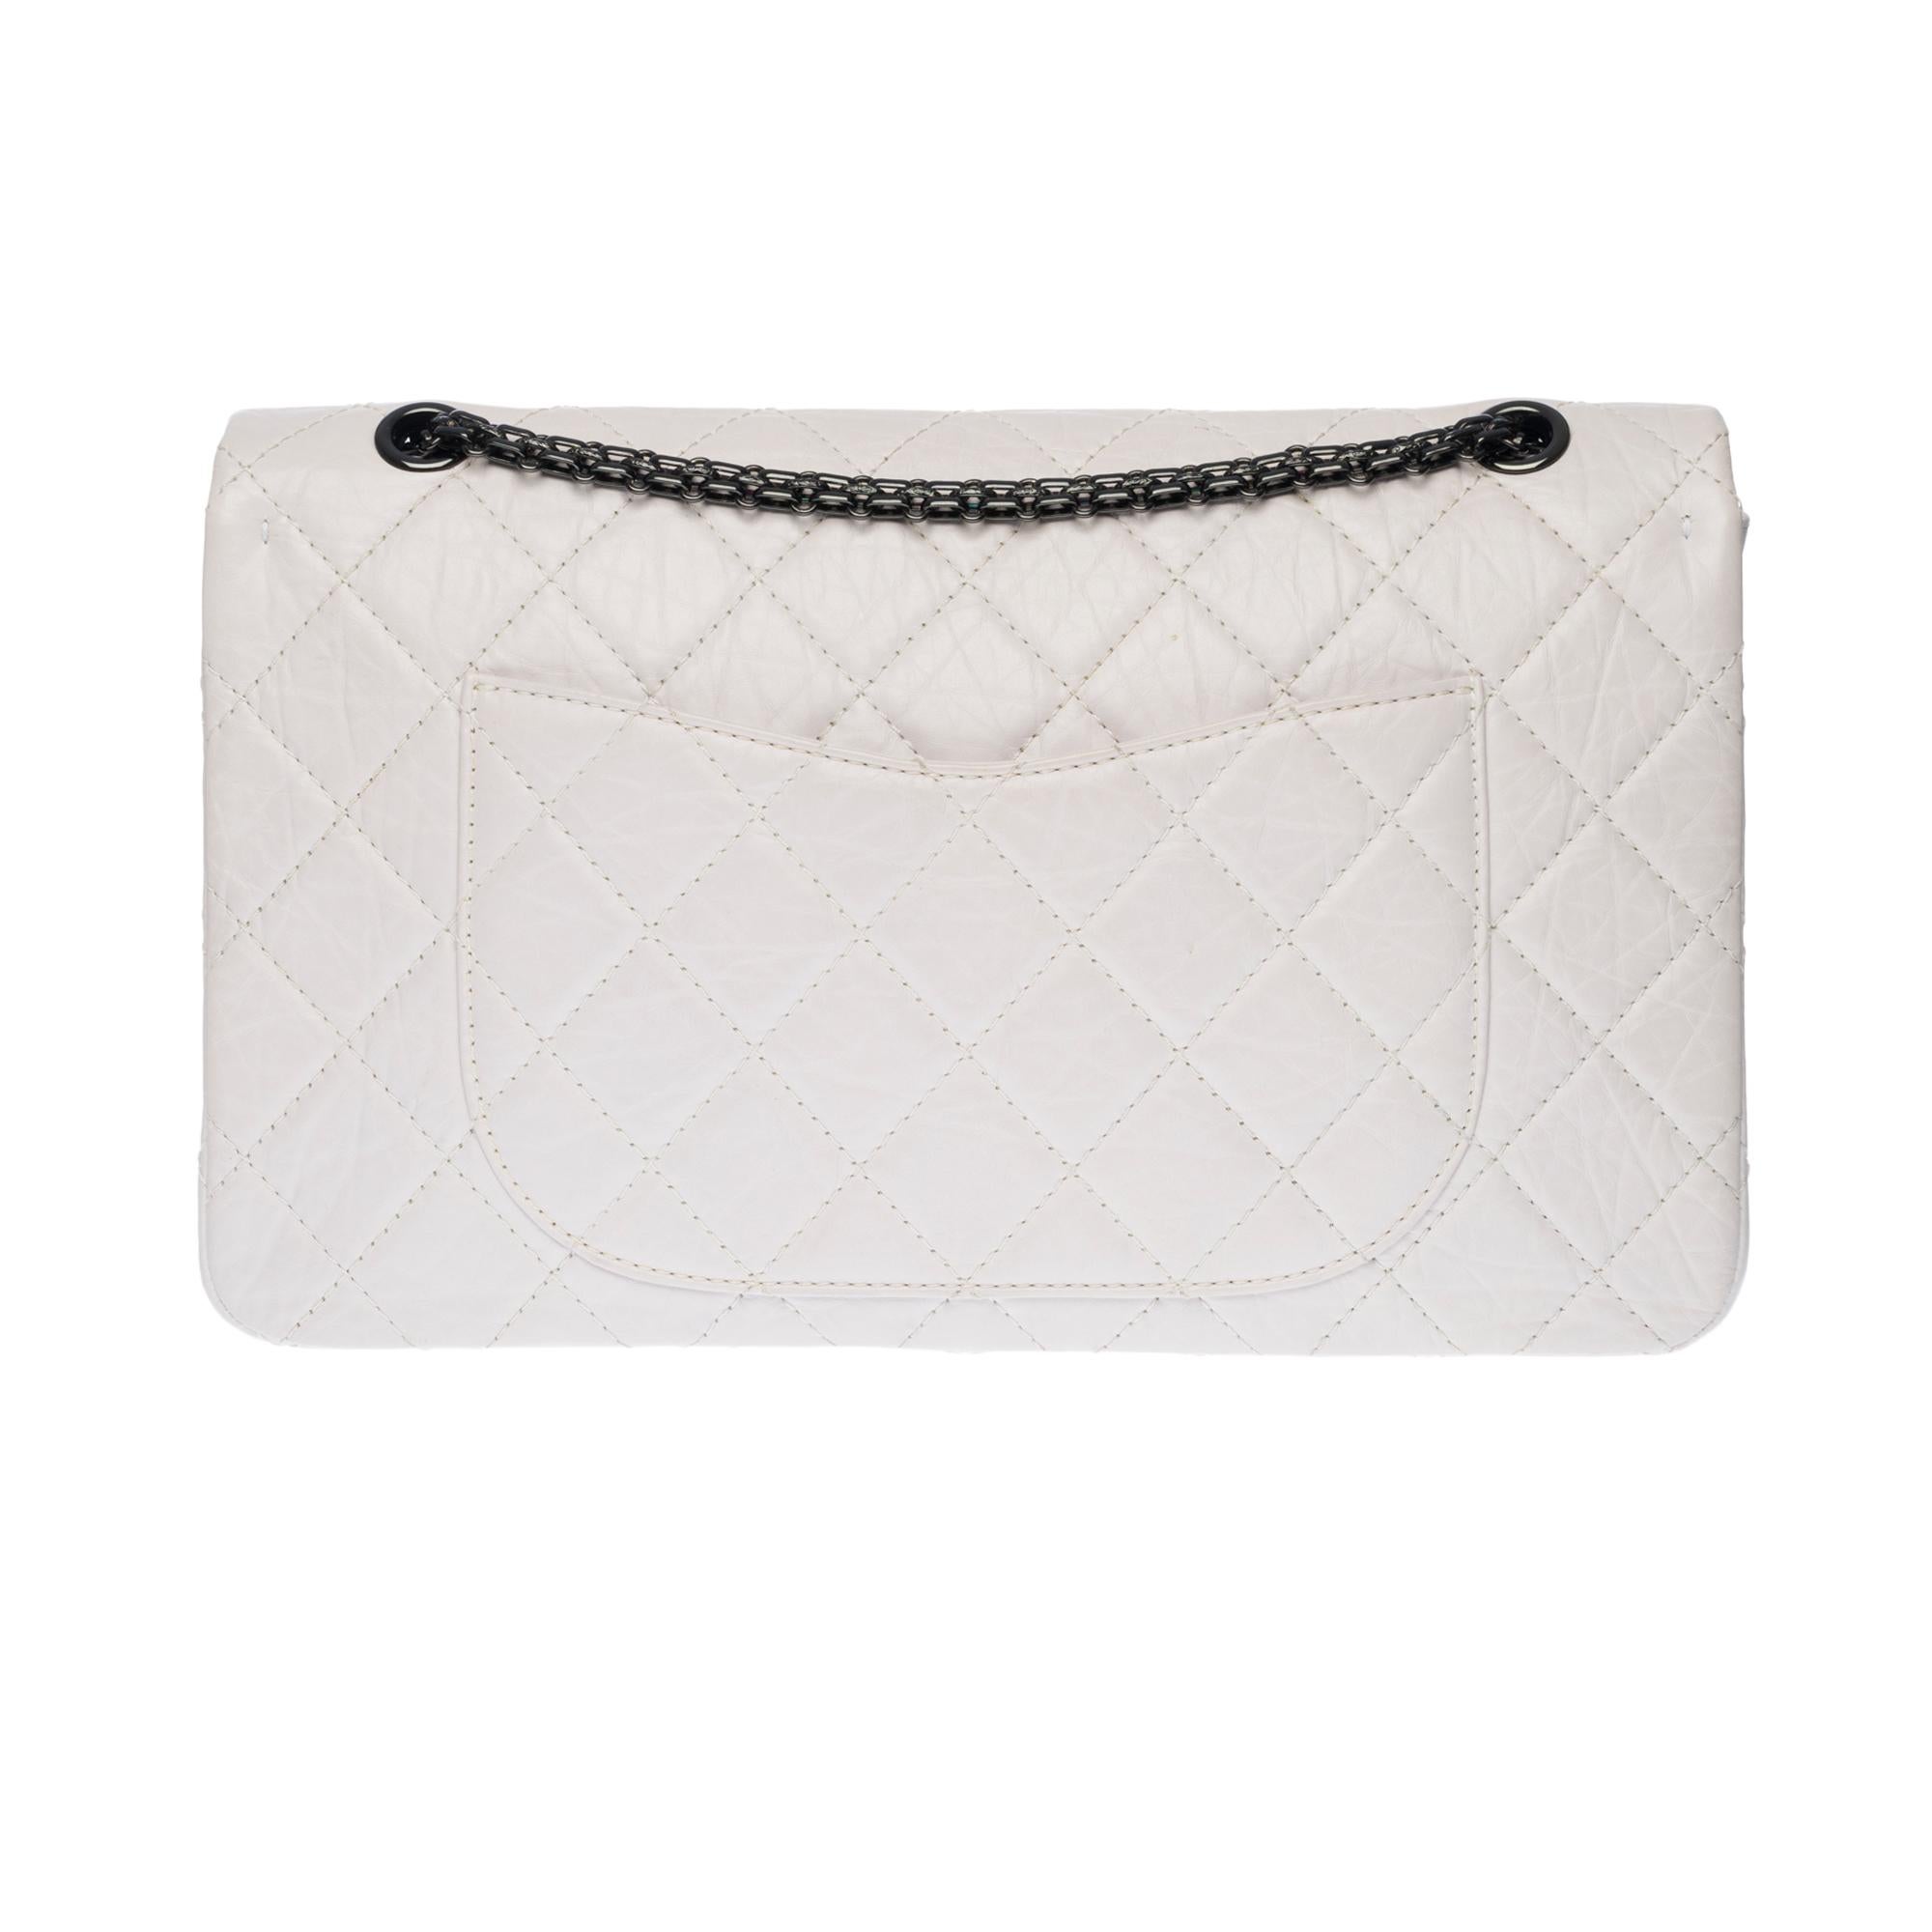 Splendid & Majestic Handbag Chanel 2.55 Reissue 227 in white quilted leather, black silver metal hardware, a chain handle transformable in black silver metal allowing a hand or shoulder or shoulder strap

Mademoiselle 2.55 black silver metal closure